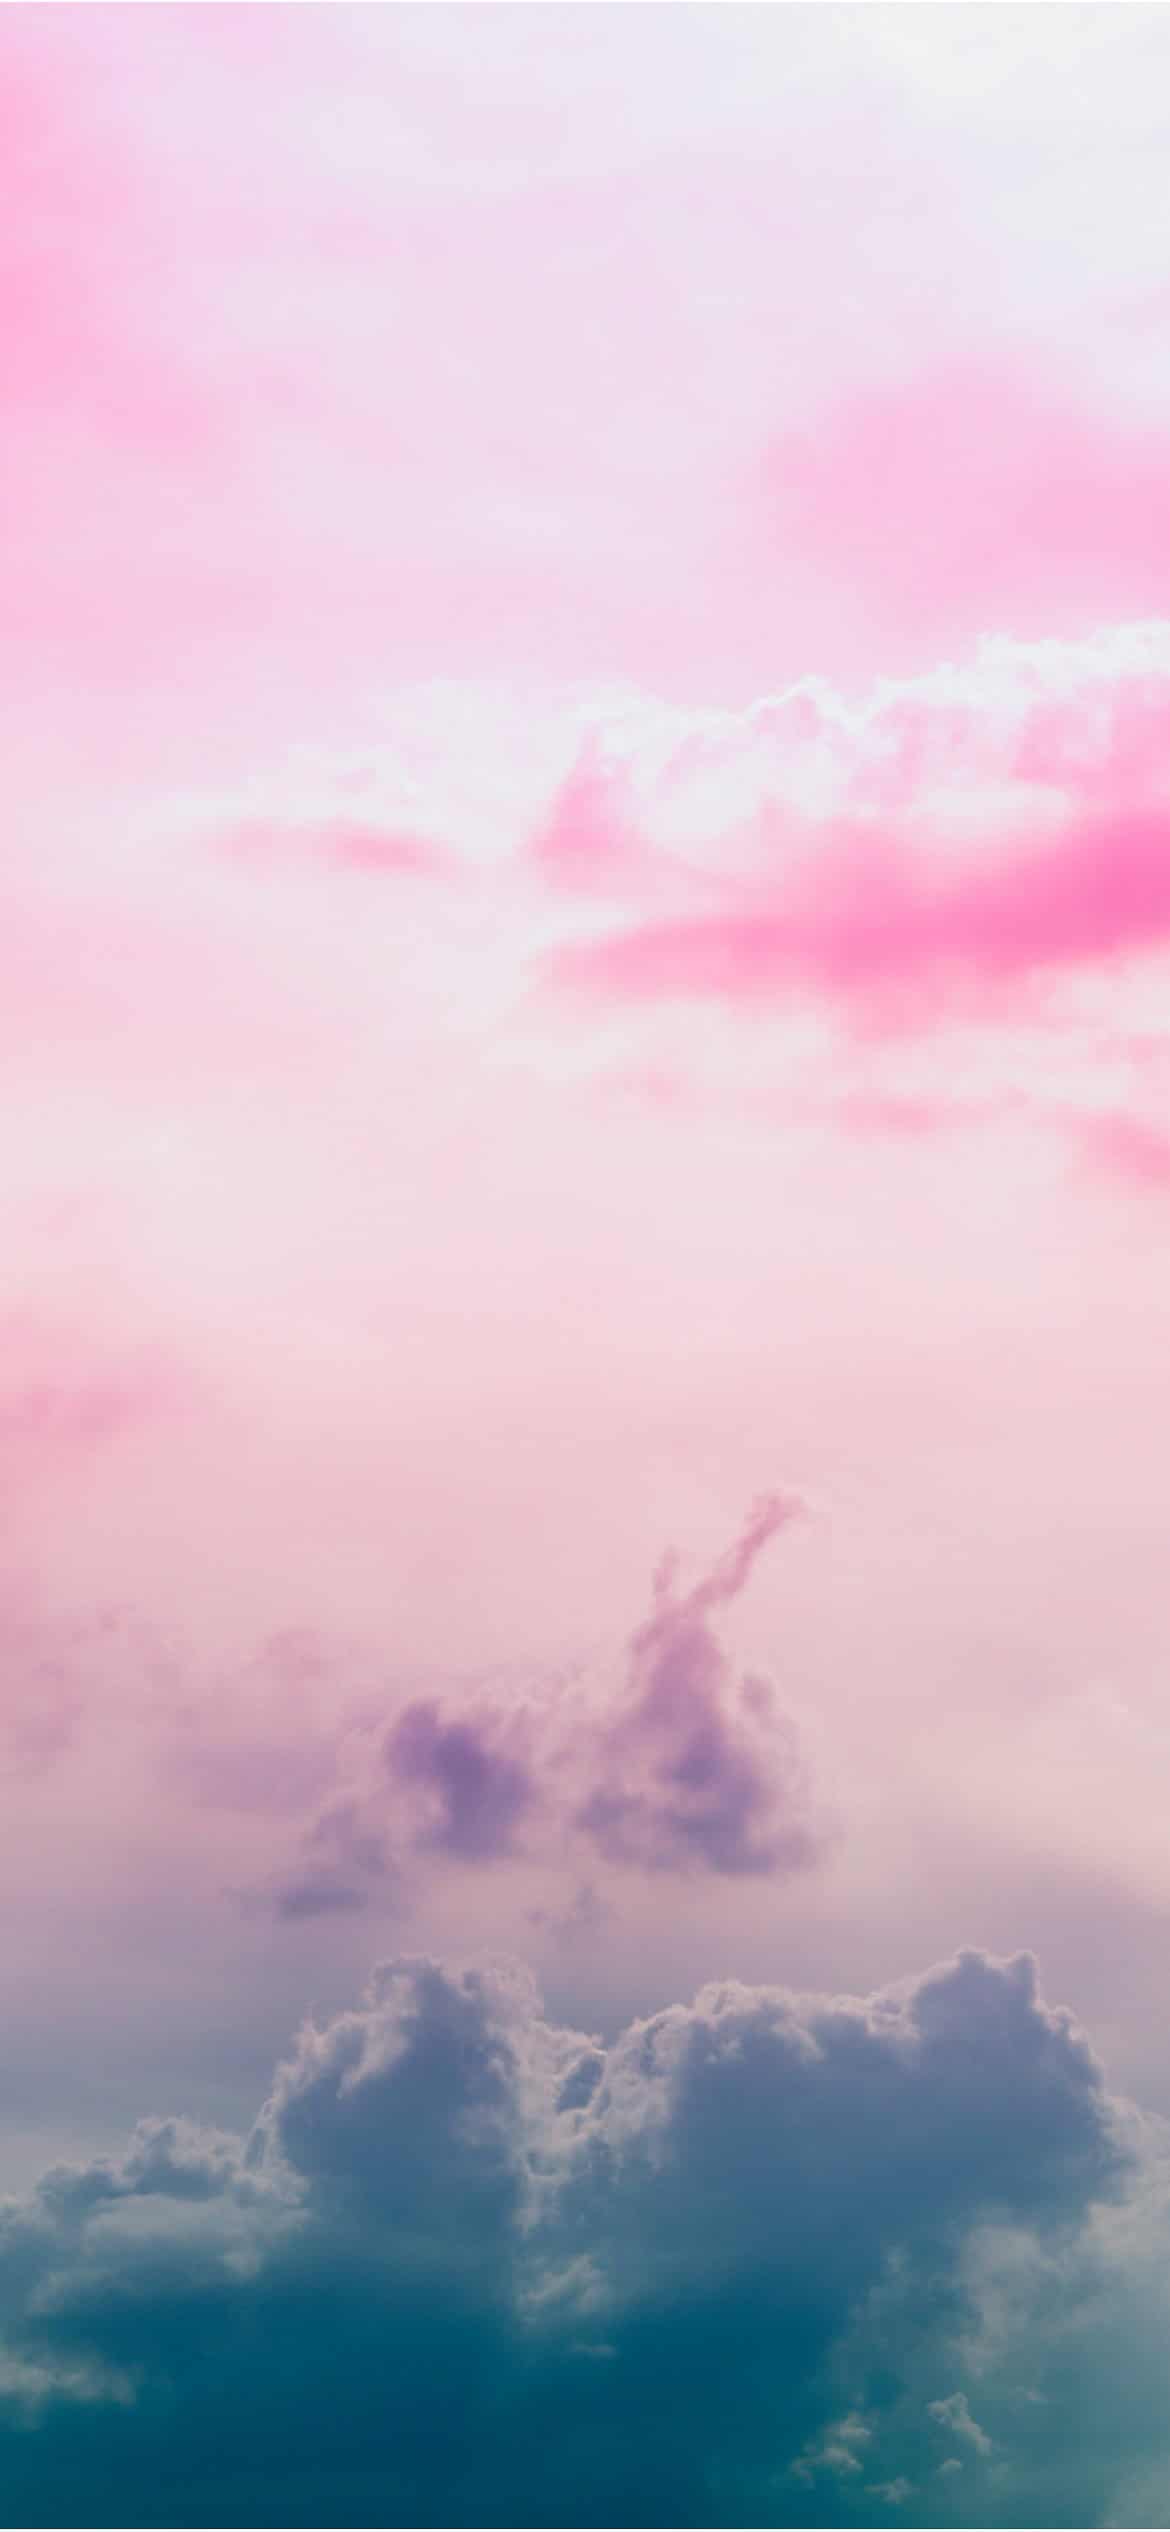 A pink and purple sky with clouds - Hot pink, soft pink, cute pink